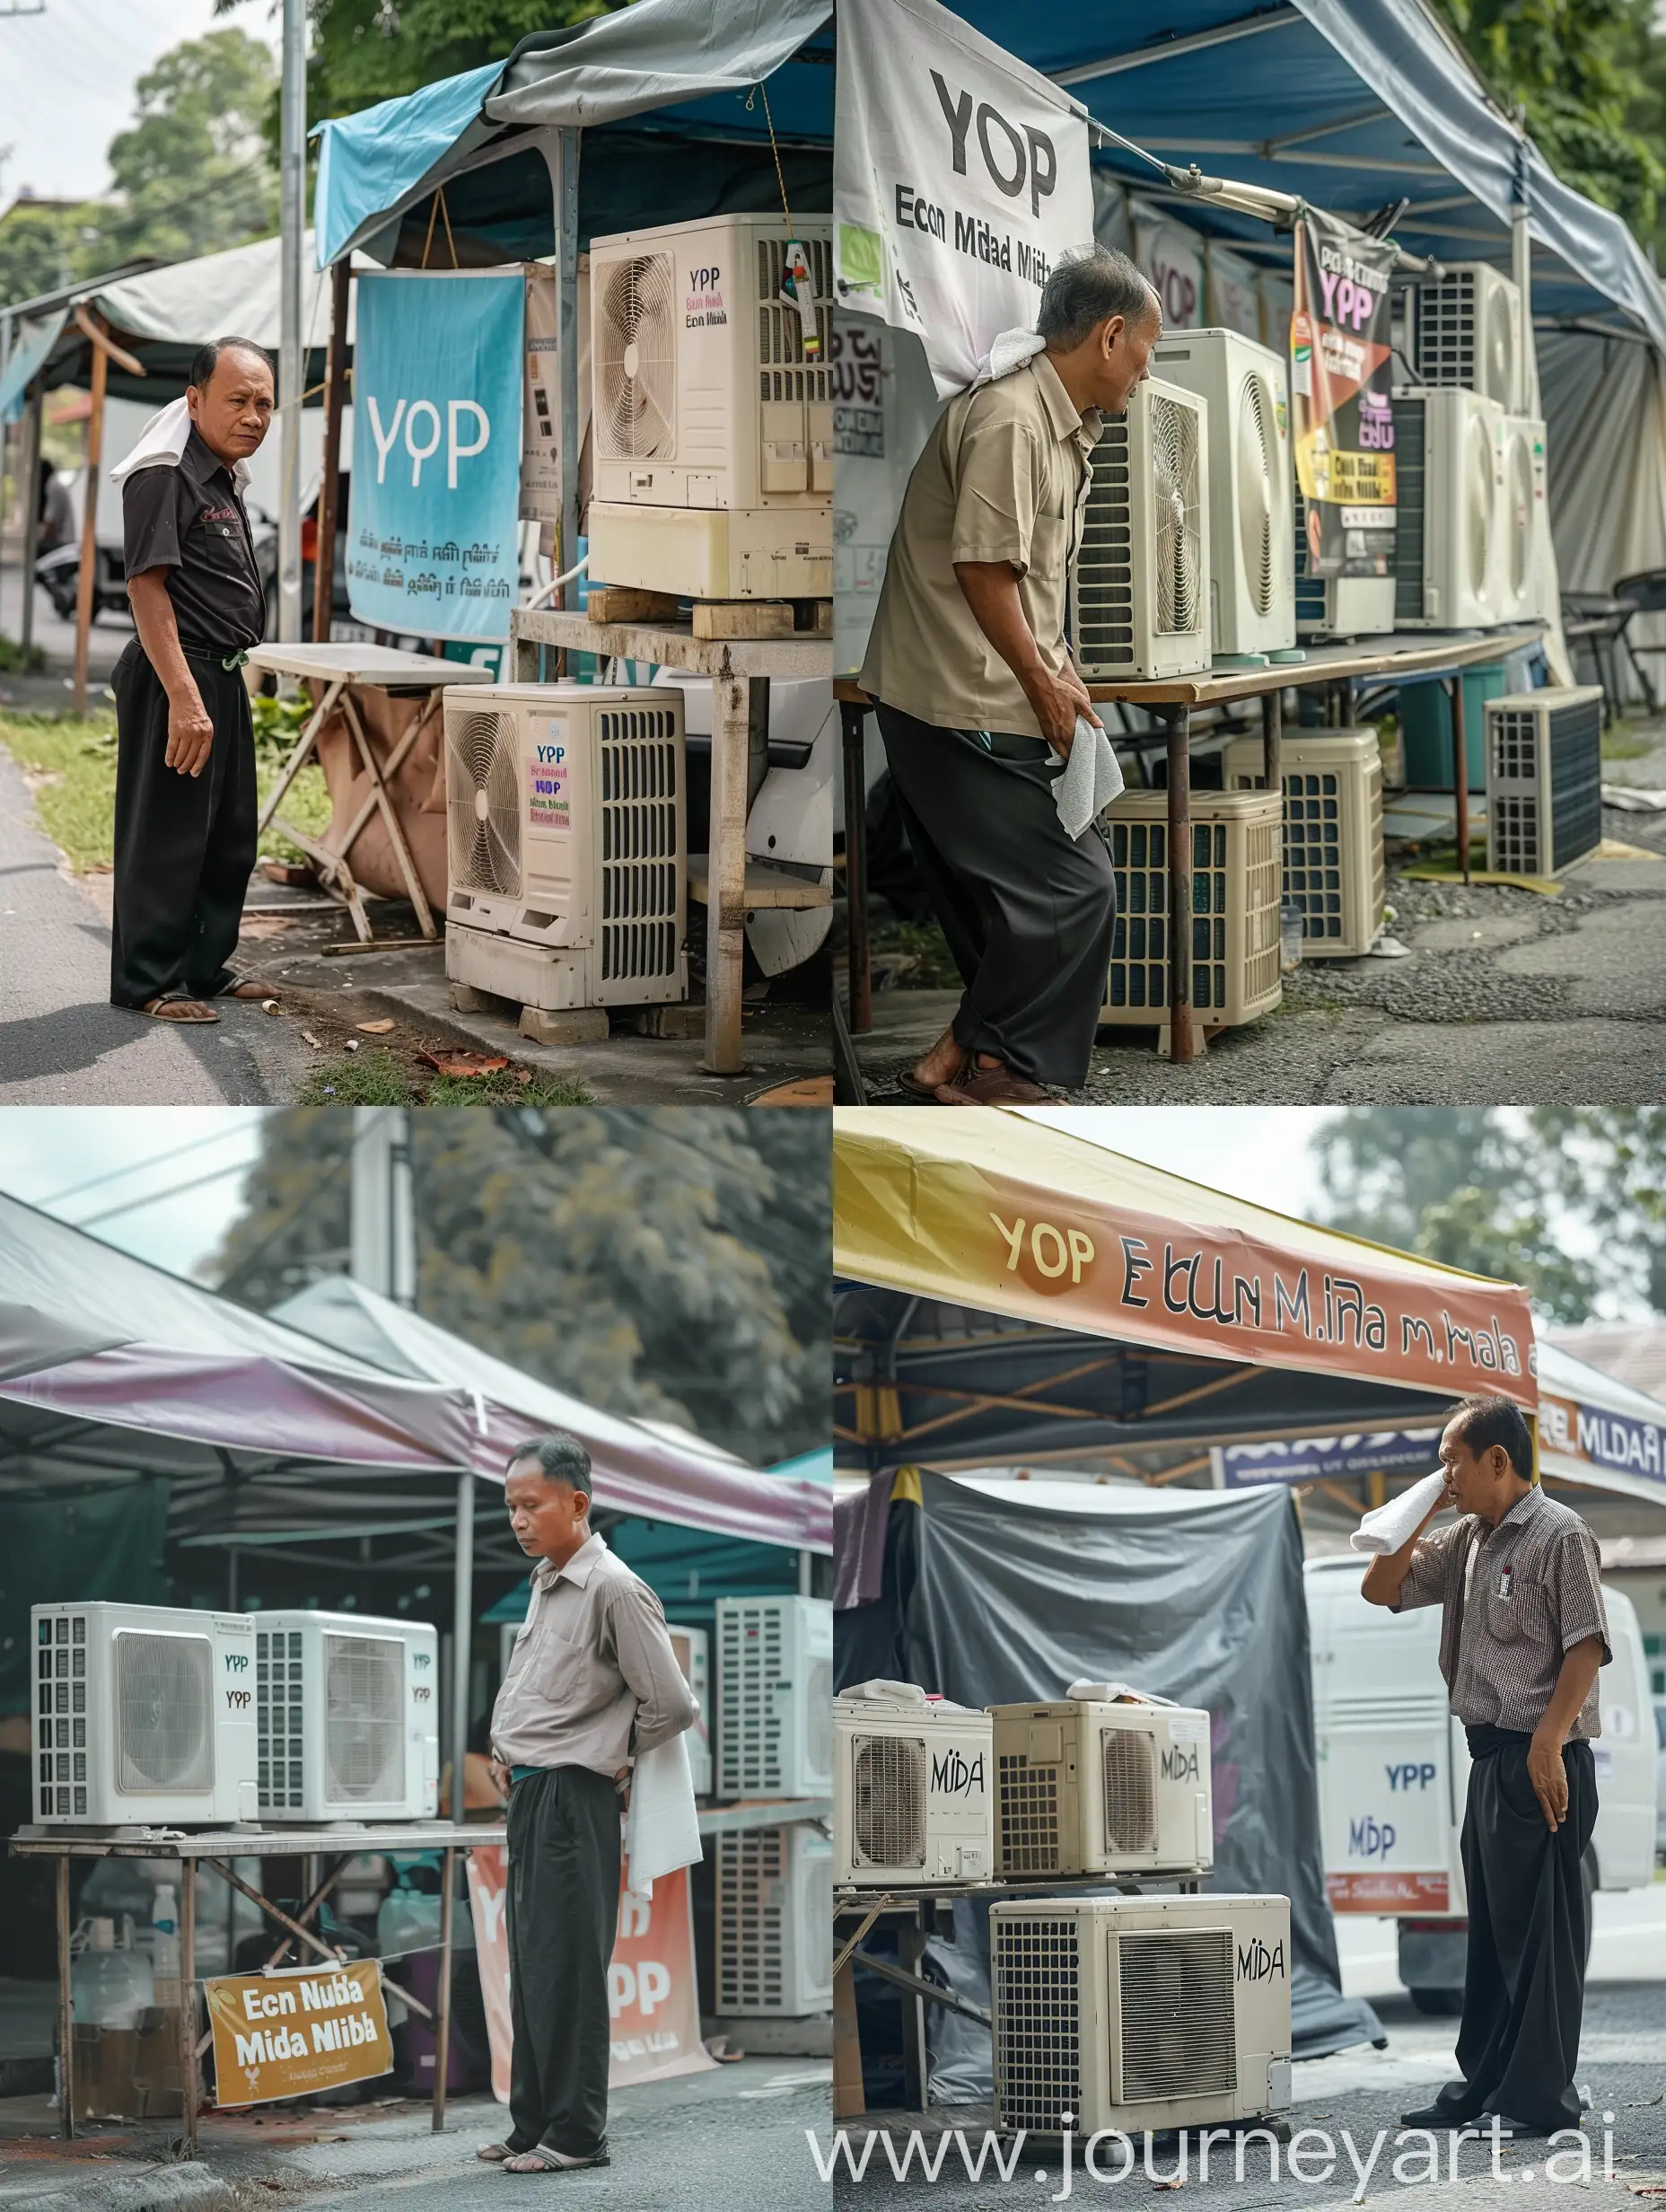 Malay-Man-Selling-YOP-and-MIDAH-Air-Conditioners-Under-Econ-Murah-Banner